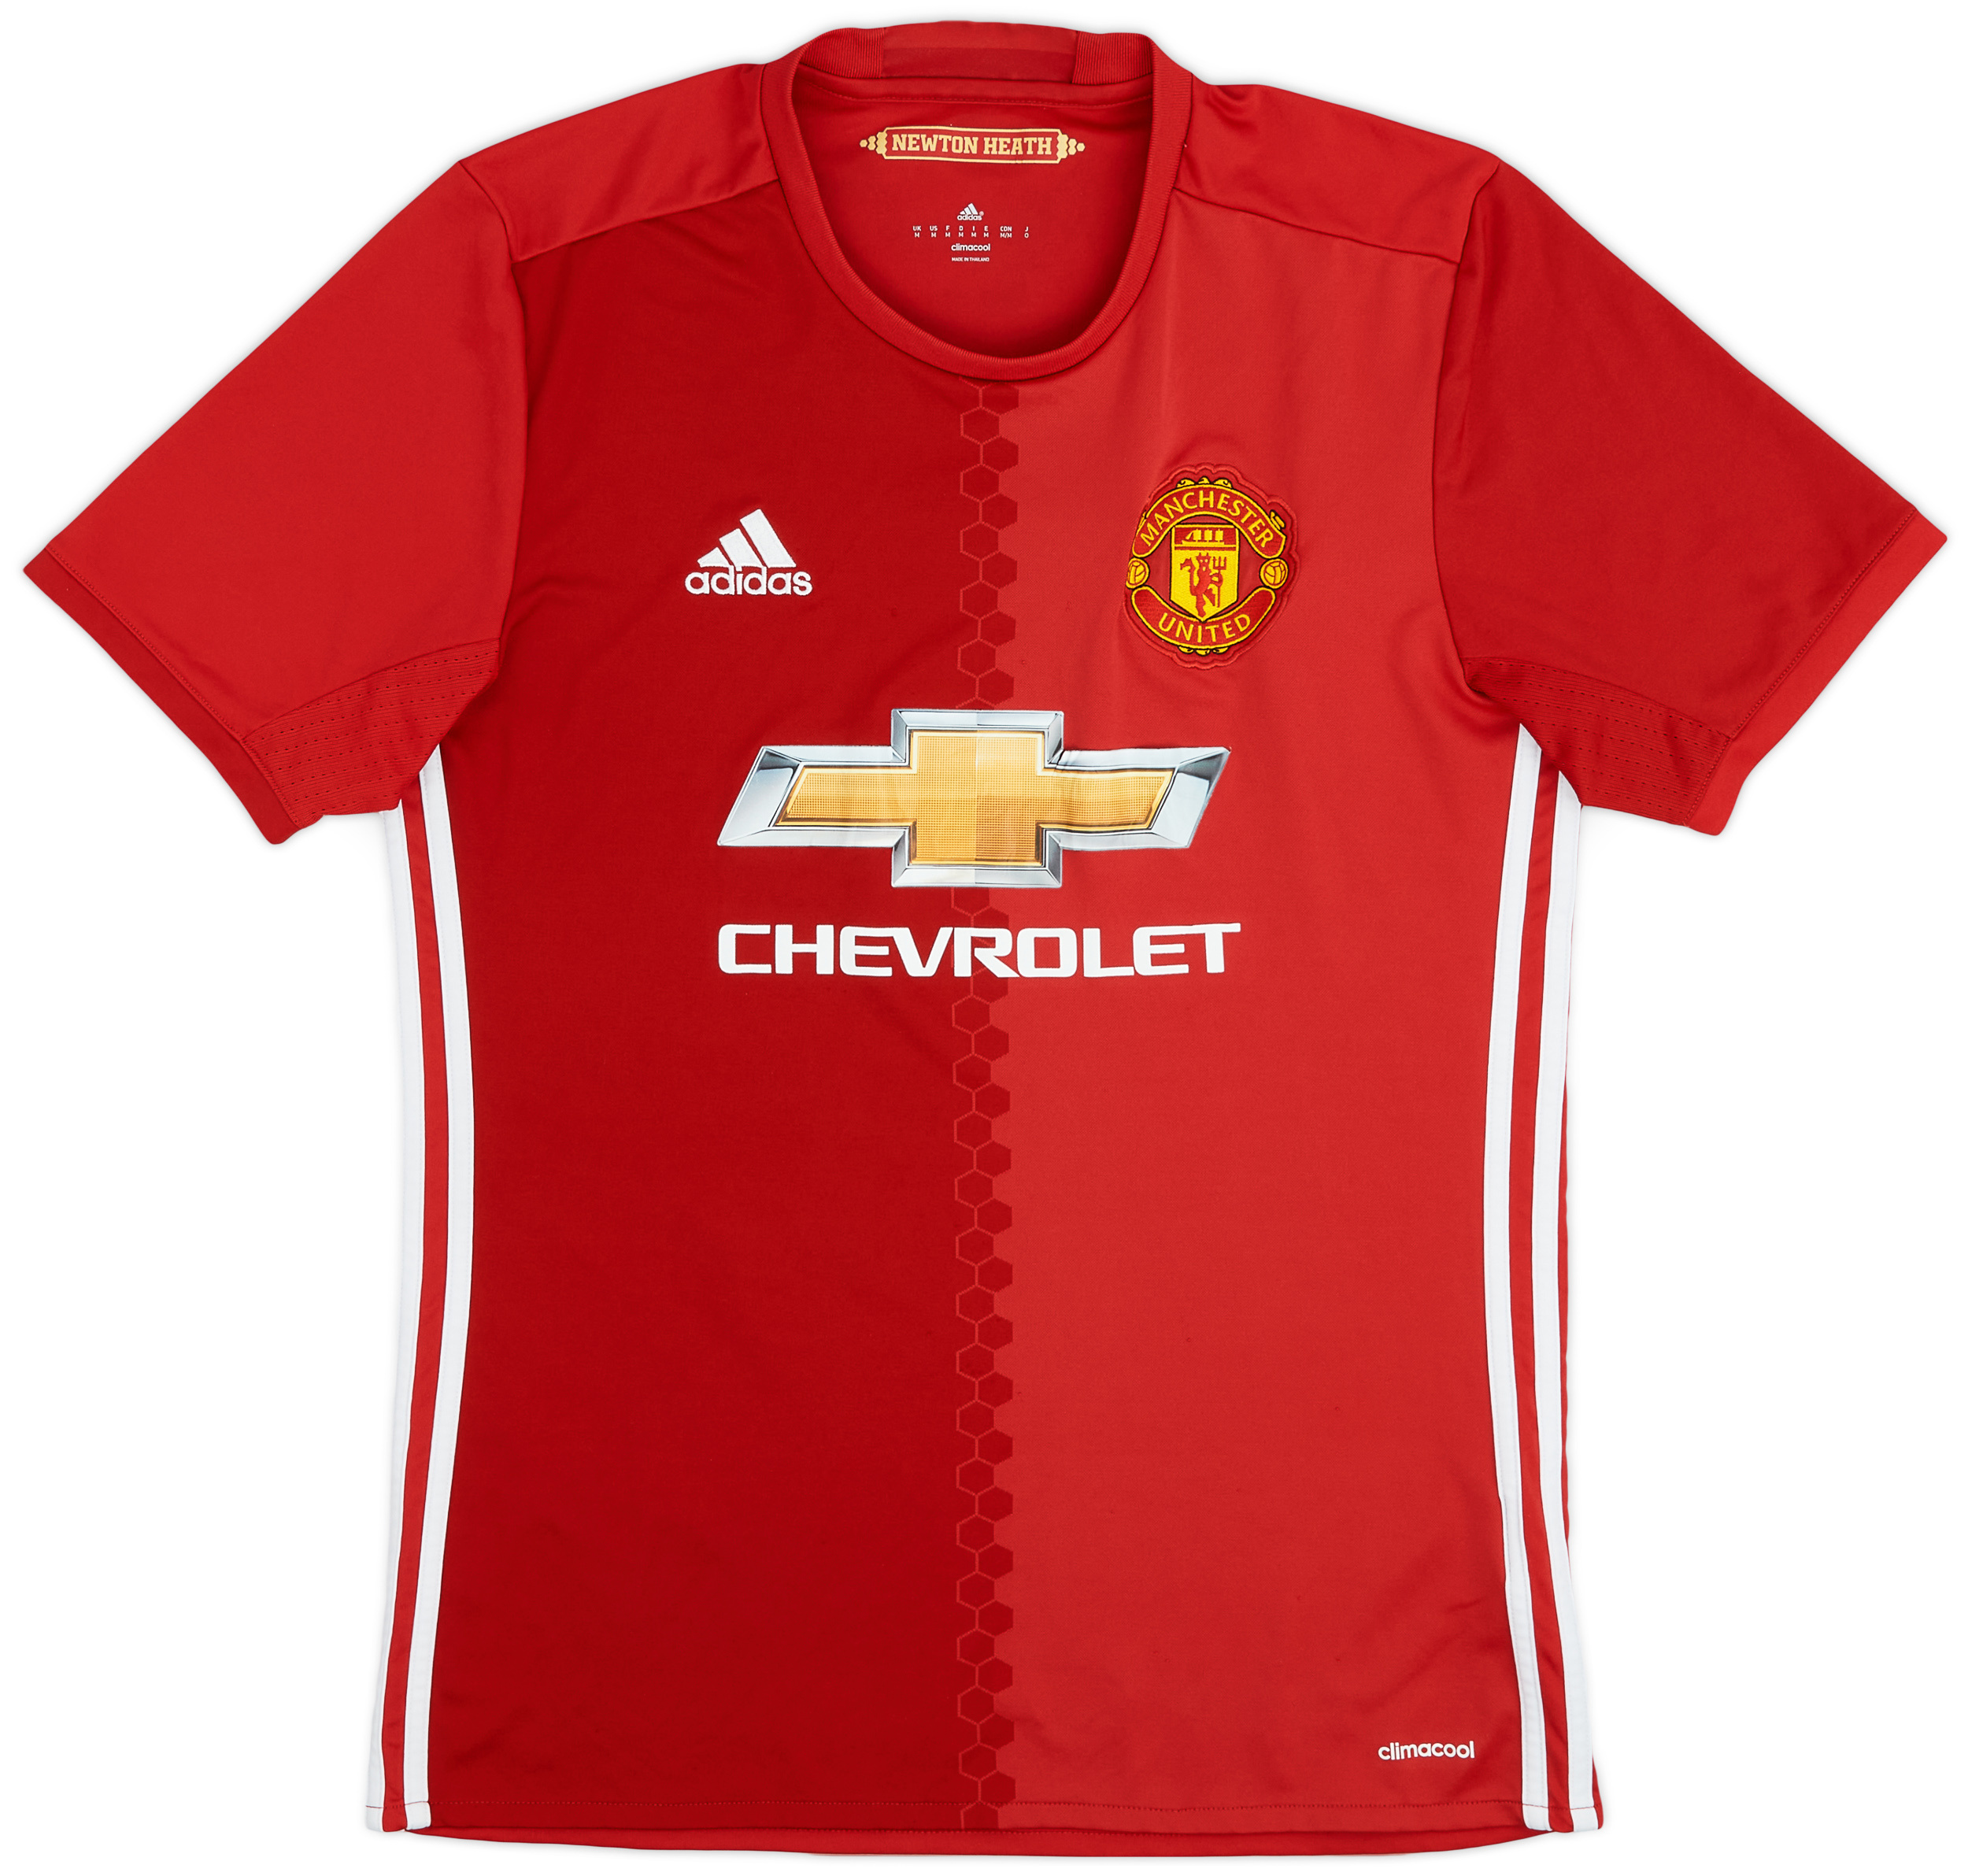 2016-17 Manchester United Home Shirt - 5/10 - ()